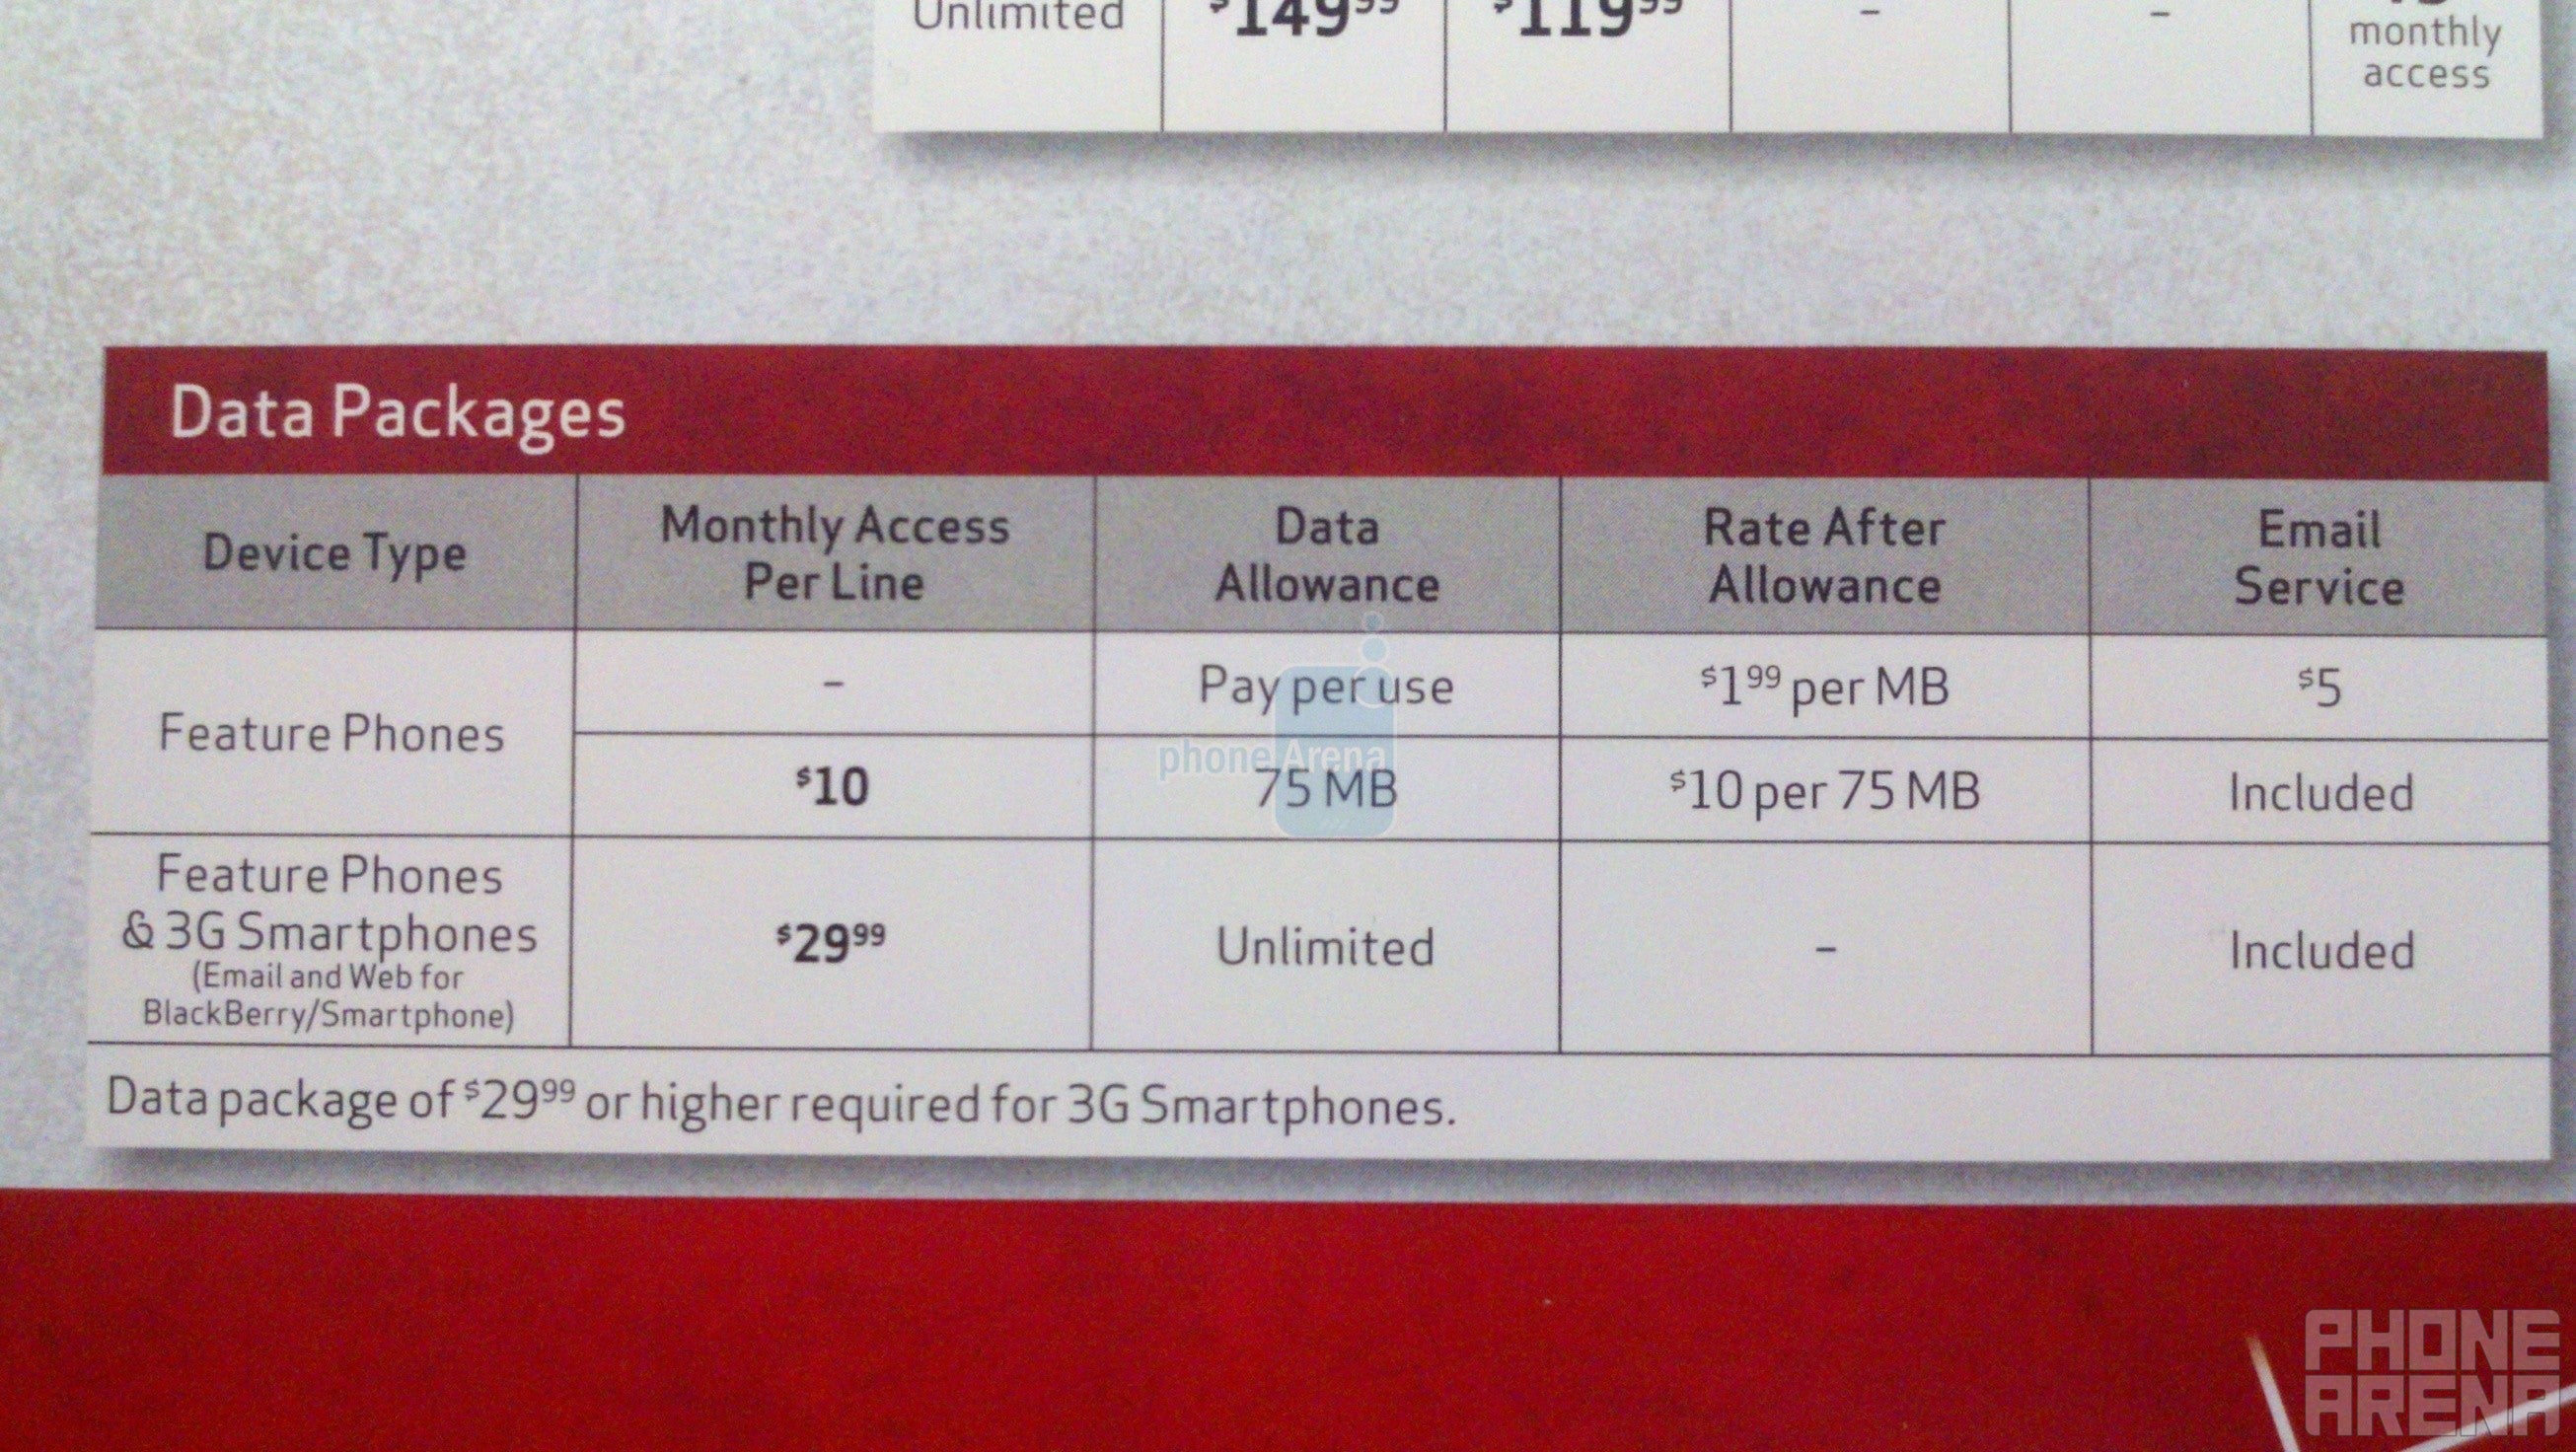 Verizon changing the data plan pricing for their feature phones